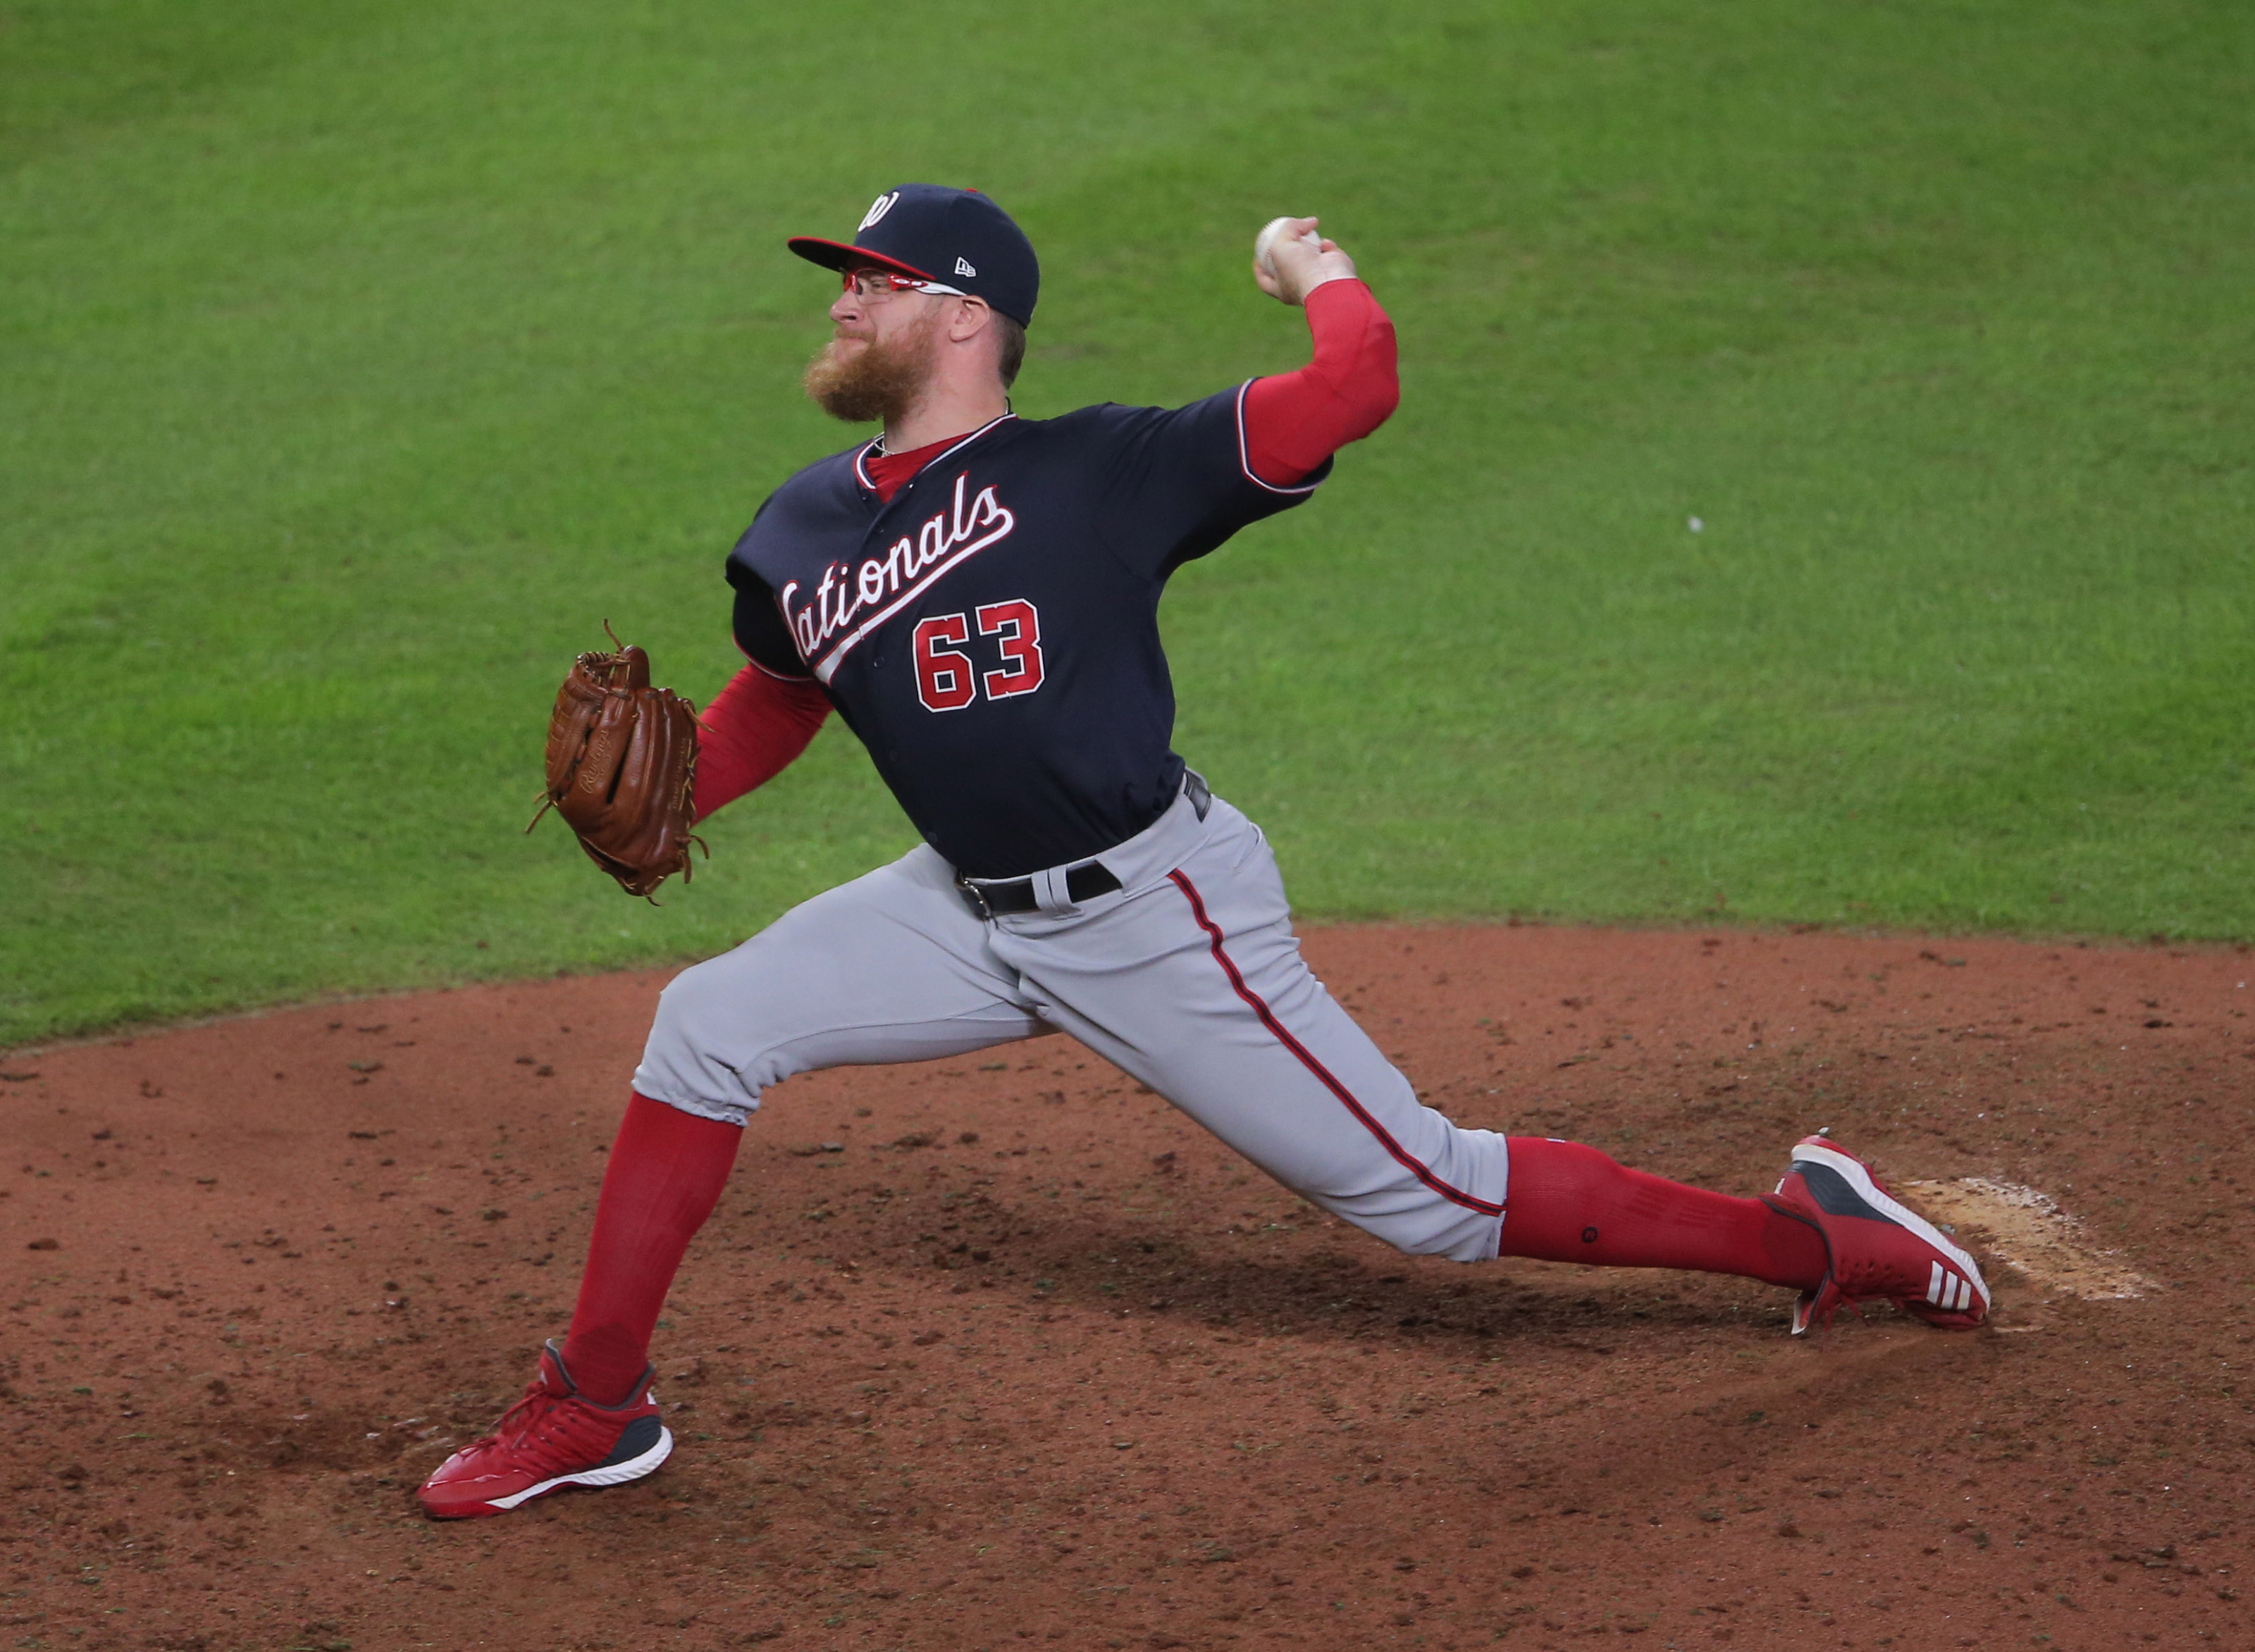 Beloved relief pitcher Sean Doolittle is back with the Washington Nationals